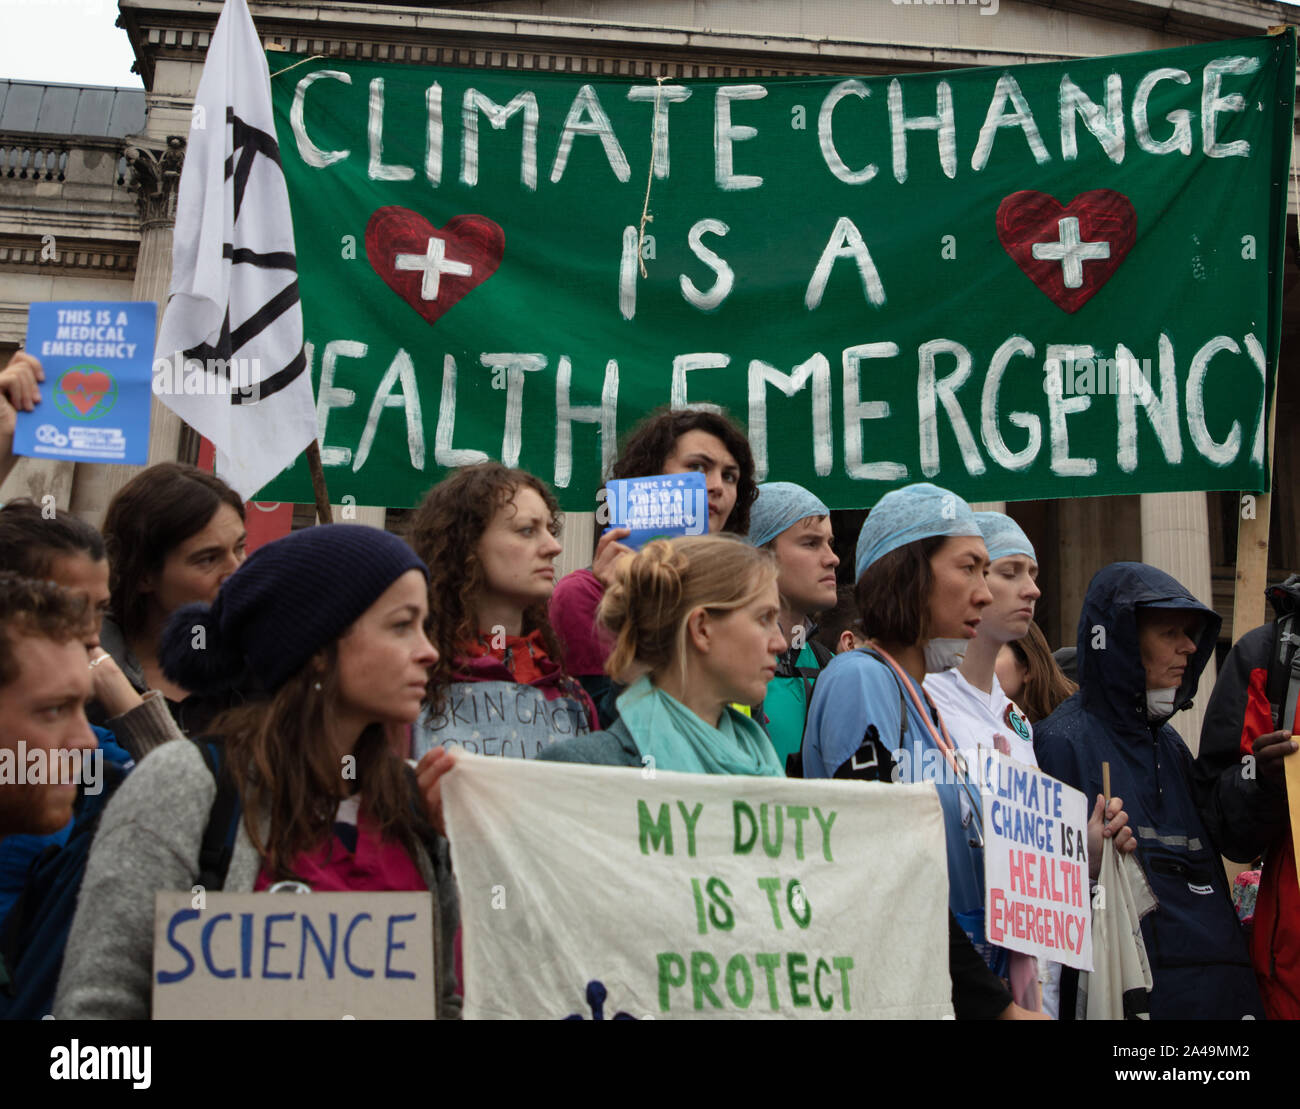 London, UK. 12th October, 2019. Doctors, nurses and health workers seen on Trafalgar Square, during the Extinction Rebellion two week long protest in London. Credit: Joe Kuis / Alamy News Stock Photo